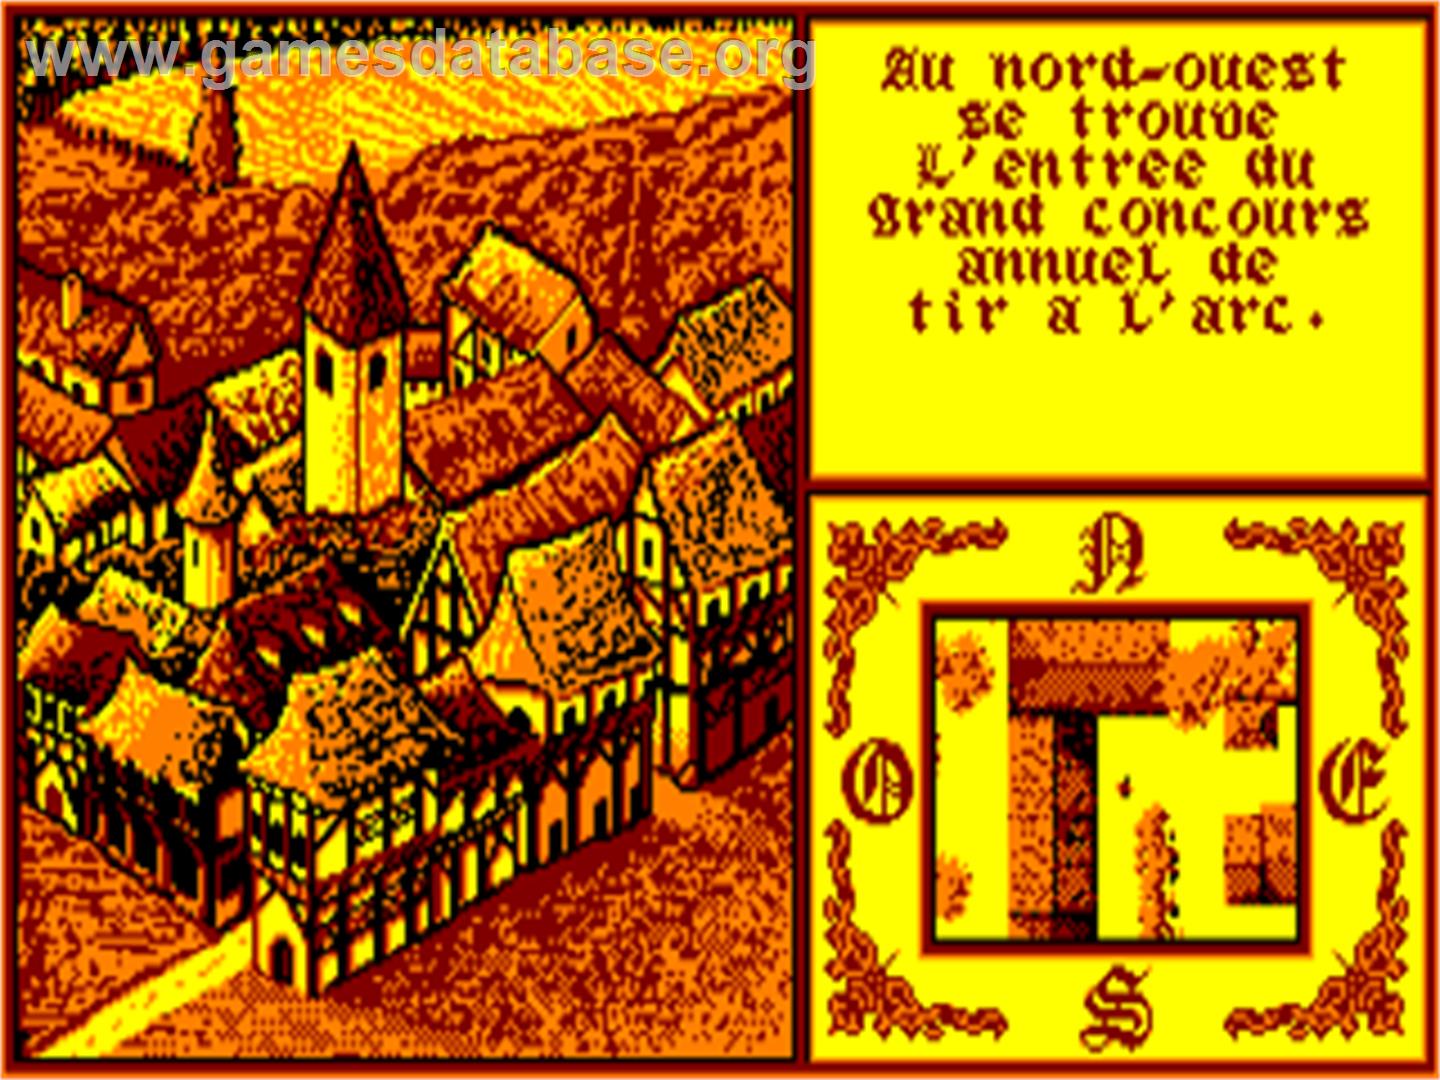 Iron Lord - Amstrad CPC - Artwork - In Game